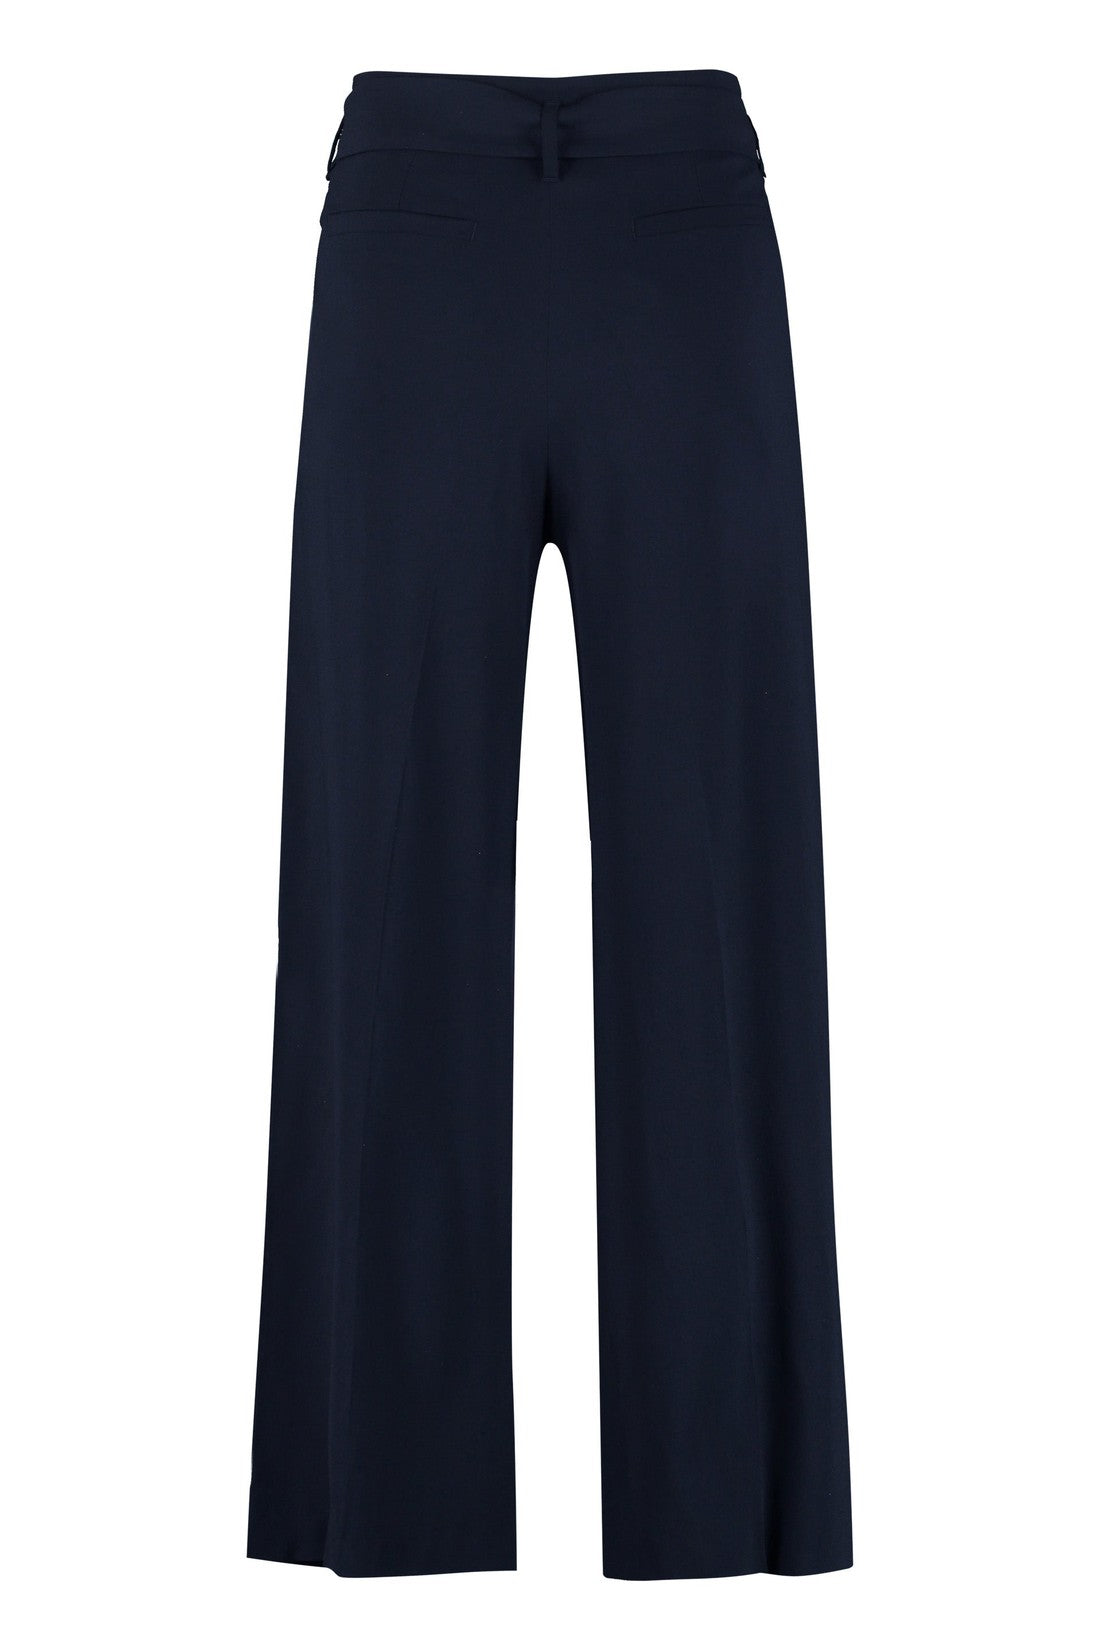 Max Mara-OUTLET-SALE-Kartal belted cropped trousers-ARCHIVIST